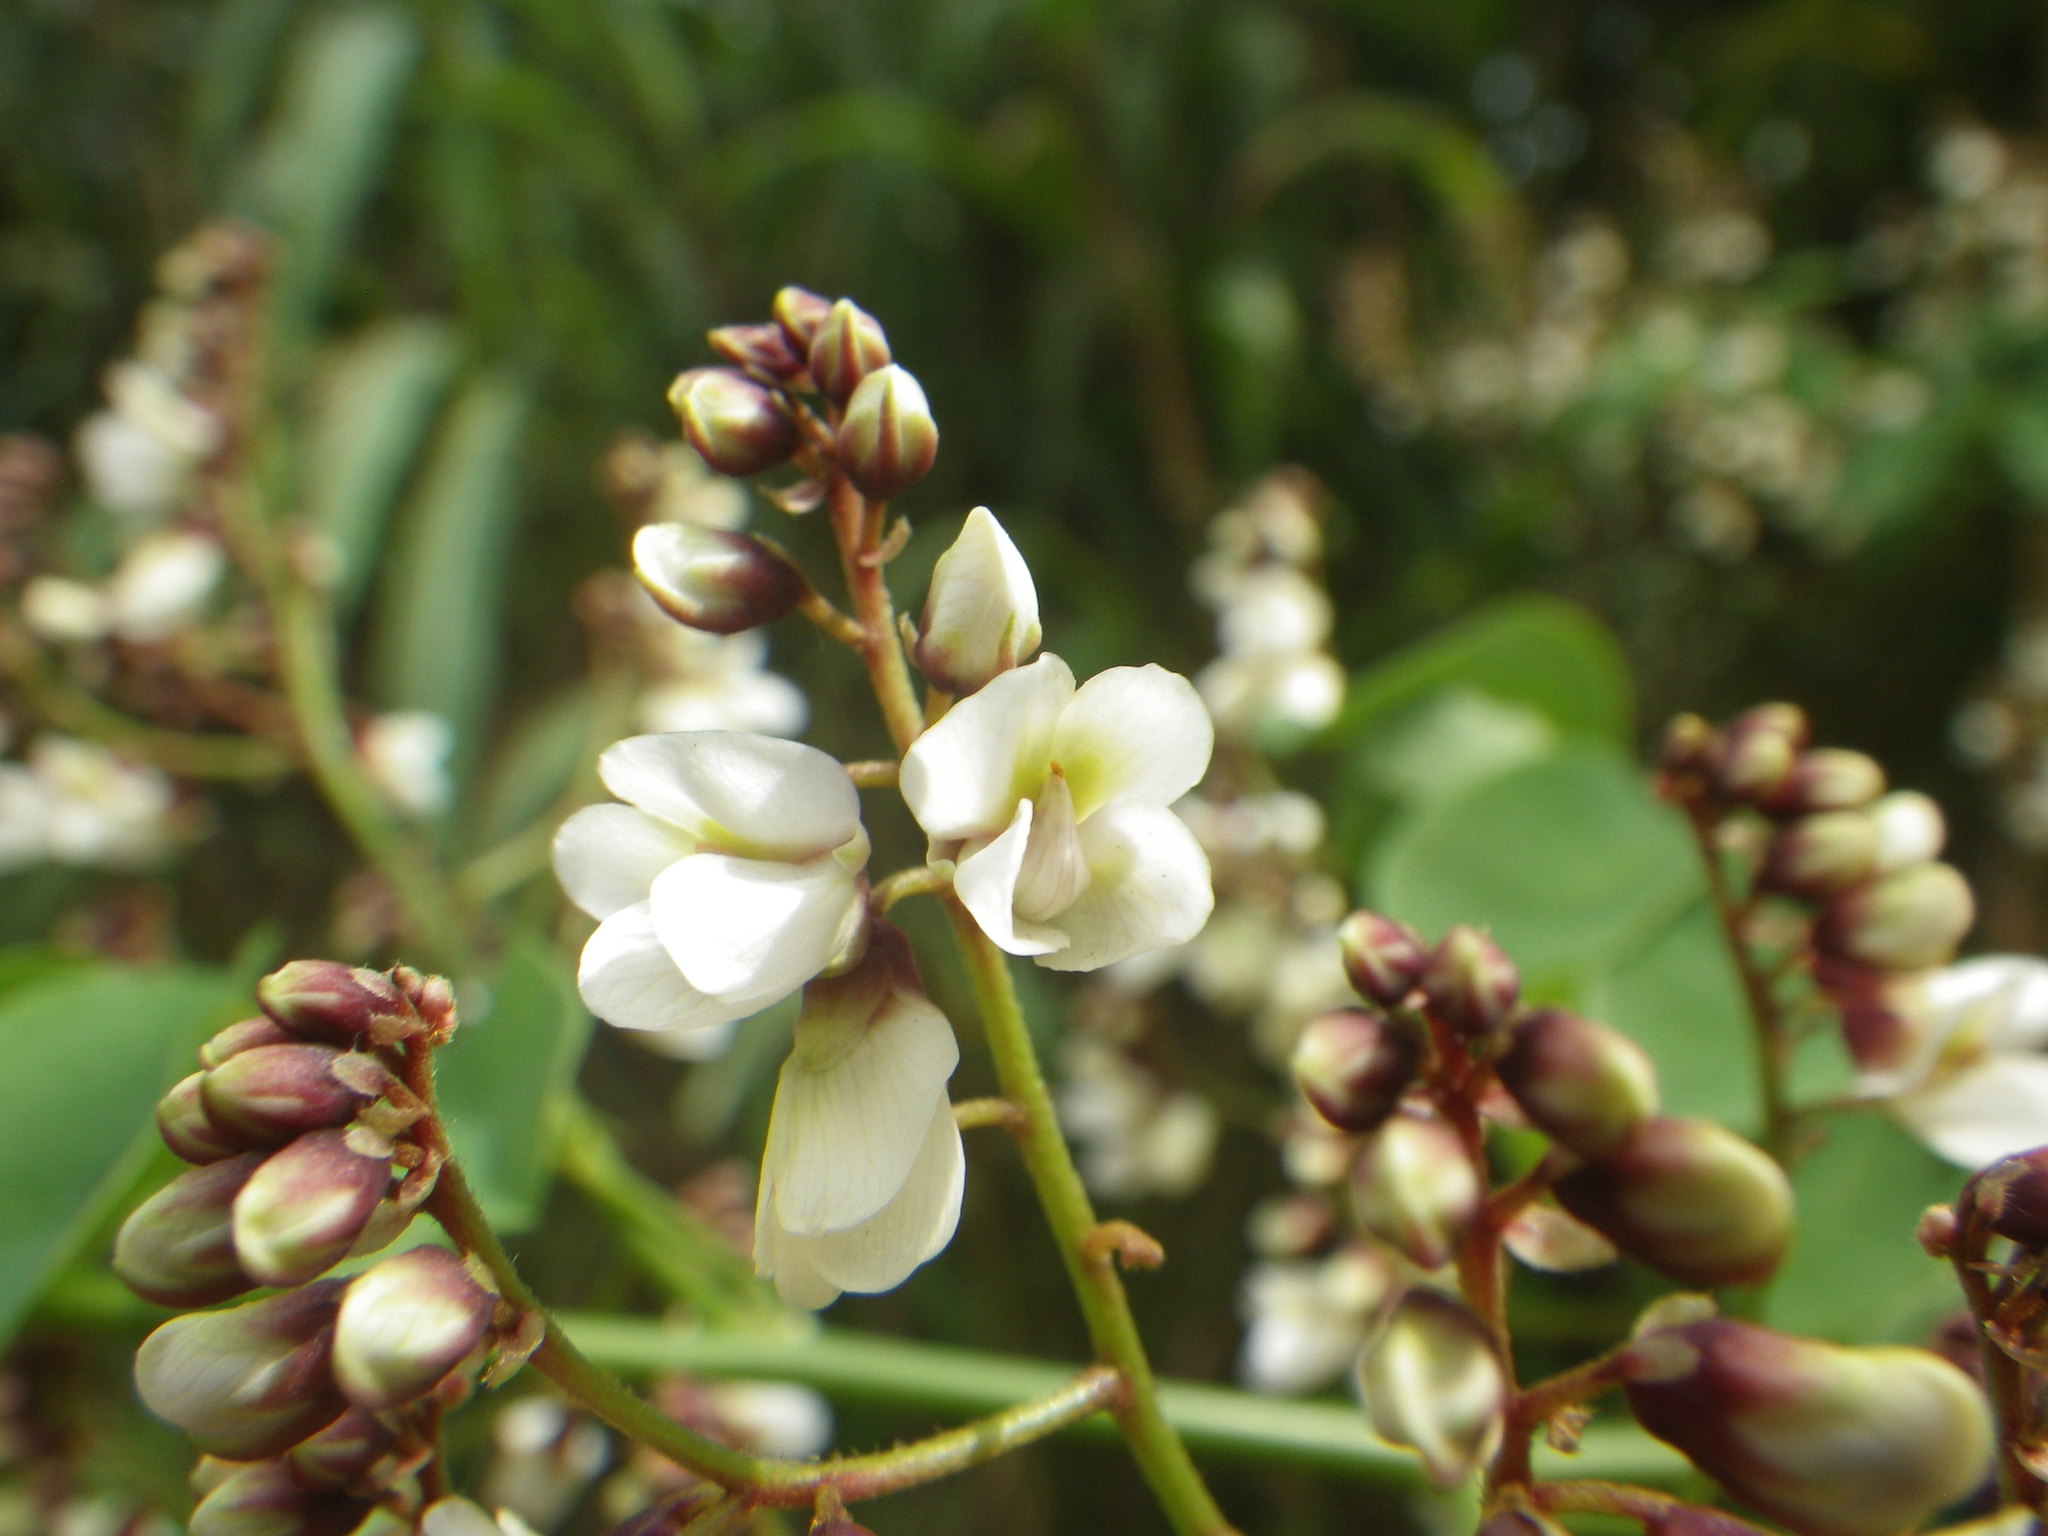 Close up of white Dalbergia saxatilis flowers and flower buds on a stem